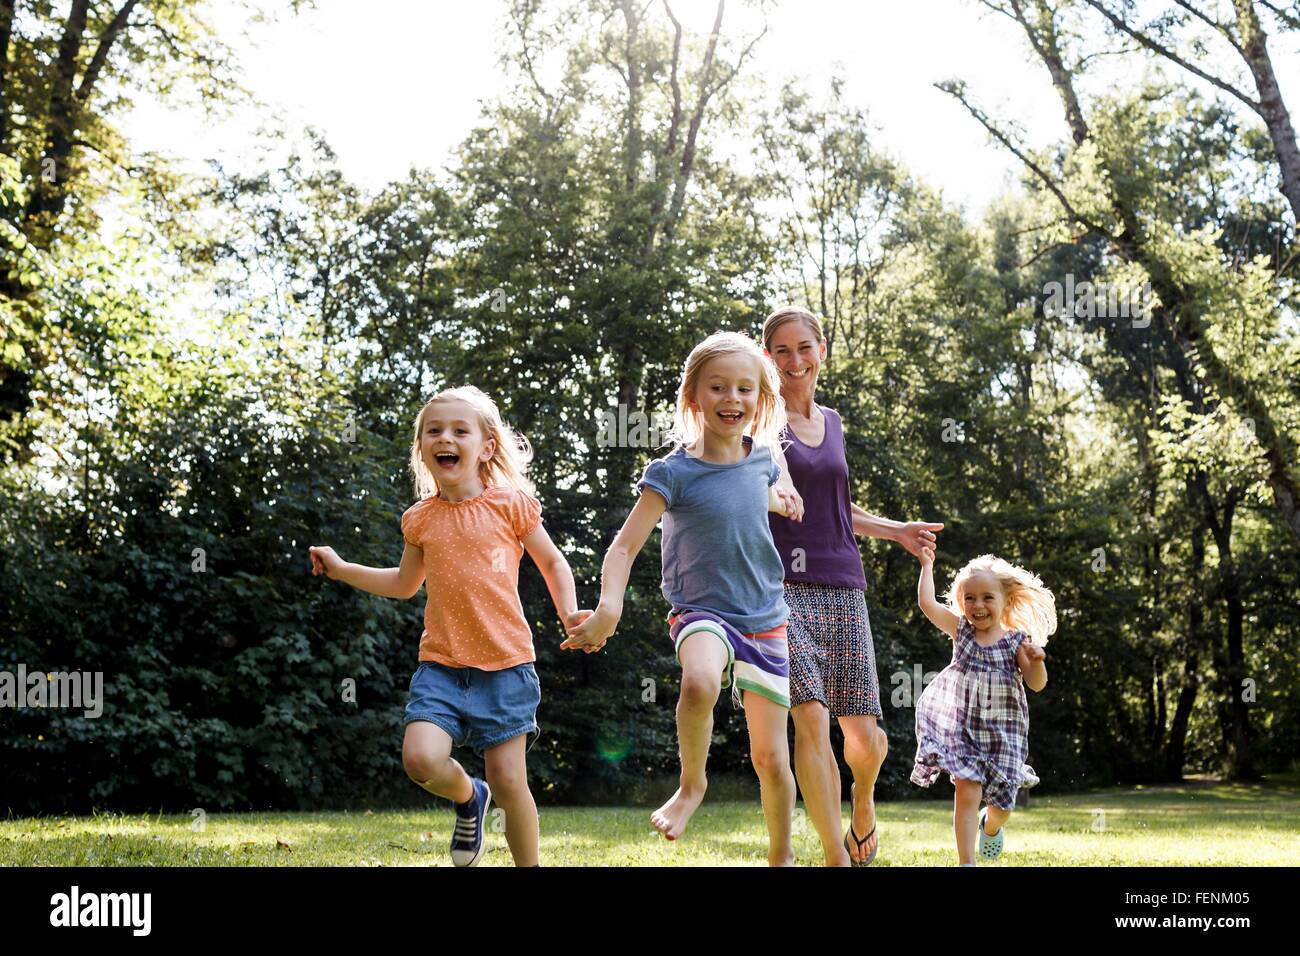 Mid adult woman and three young daughters running in park Stock Photo